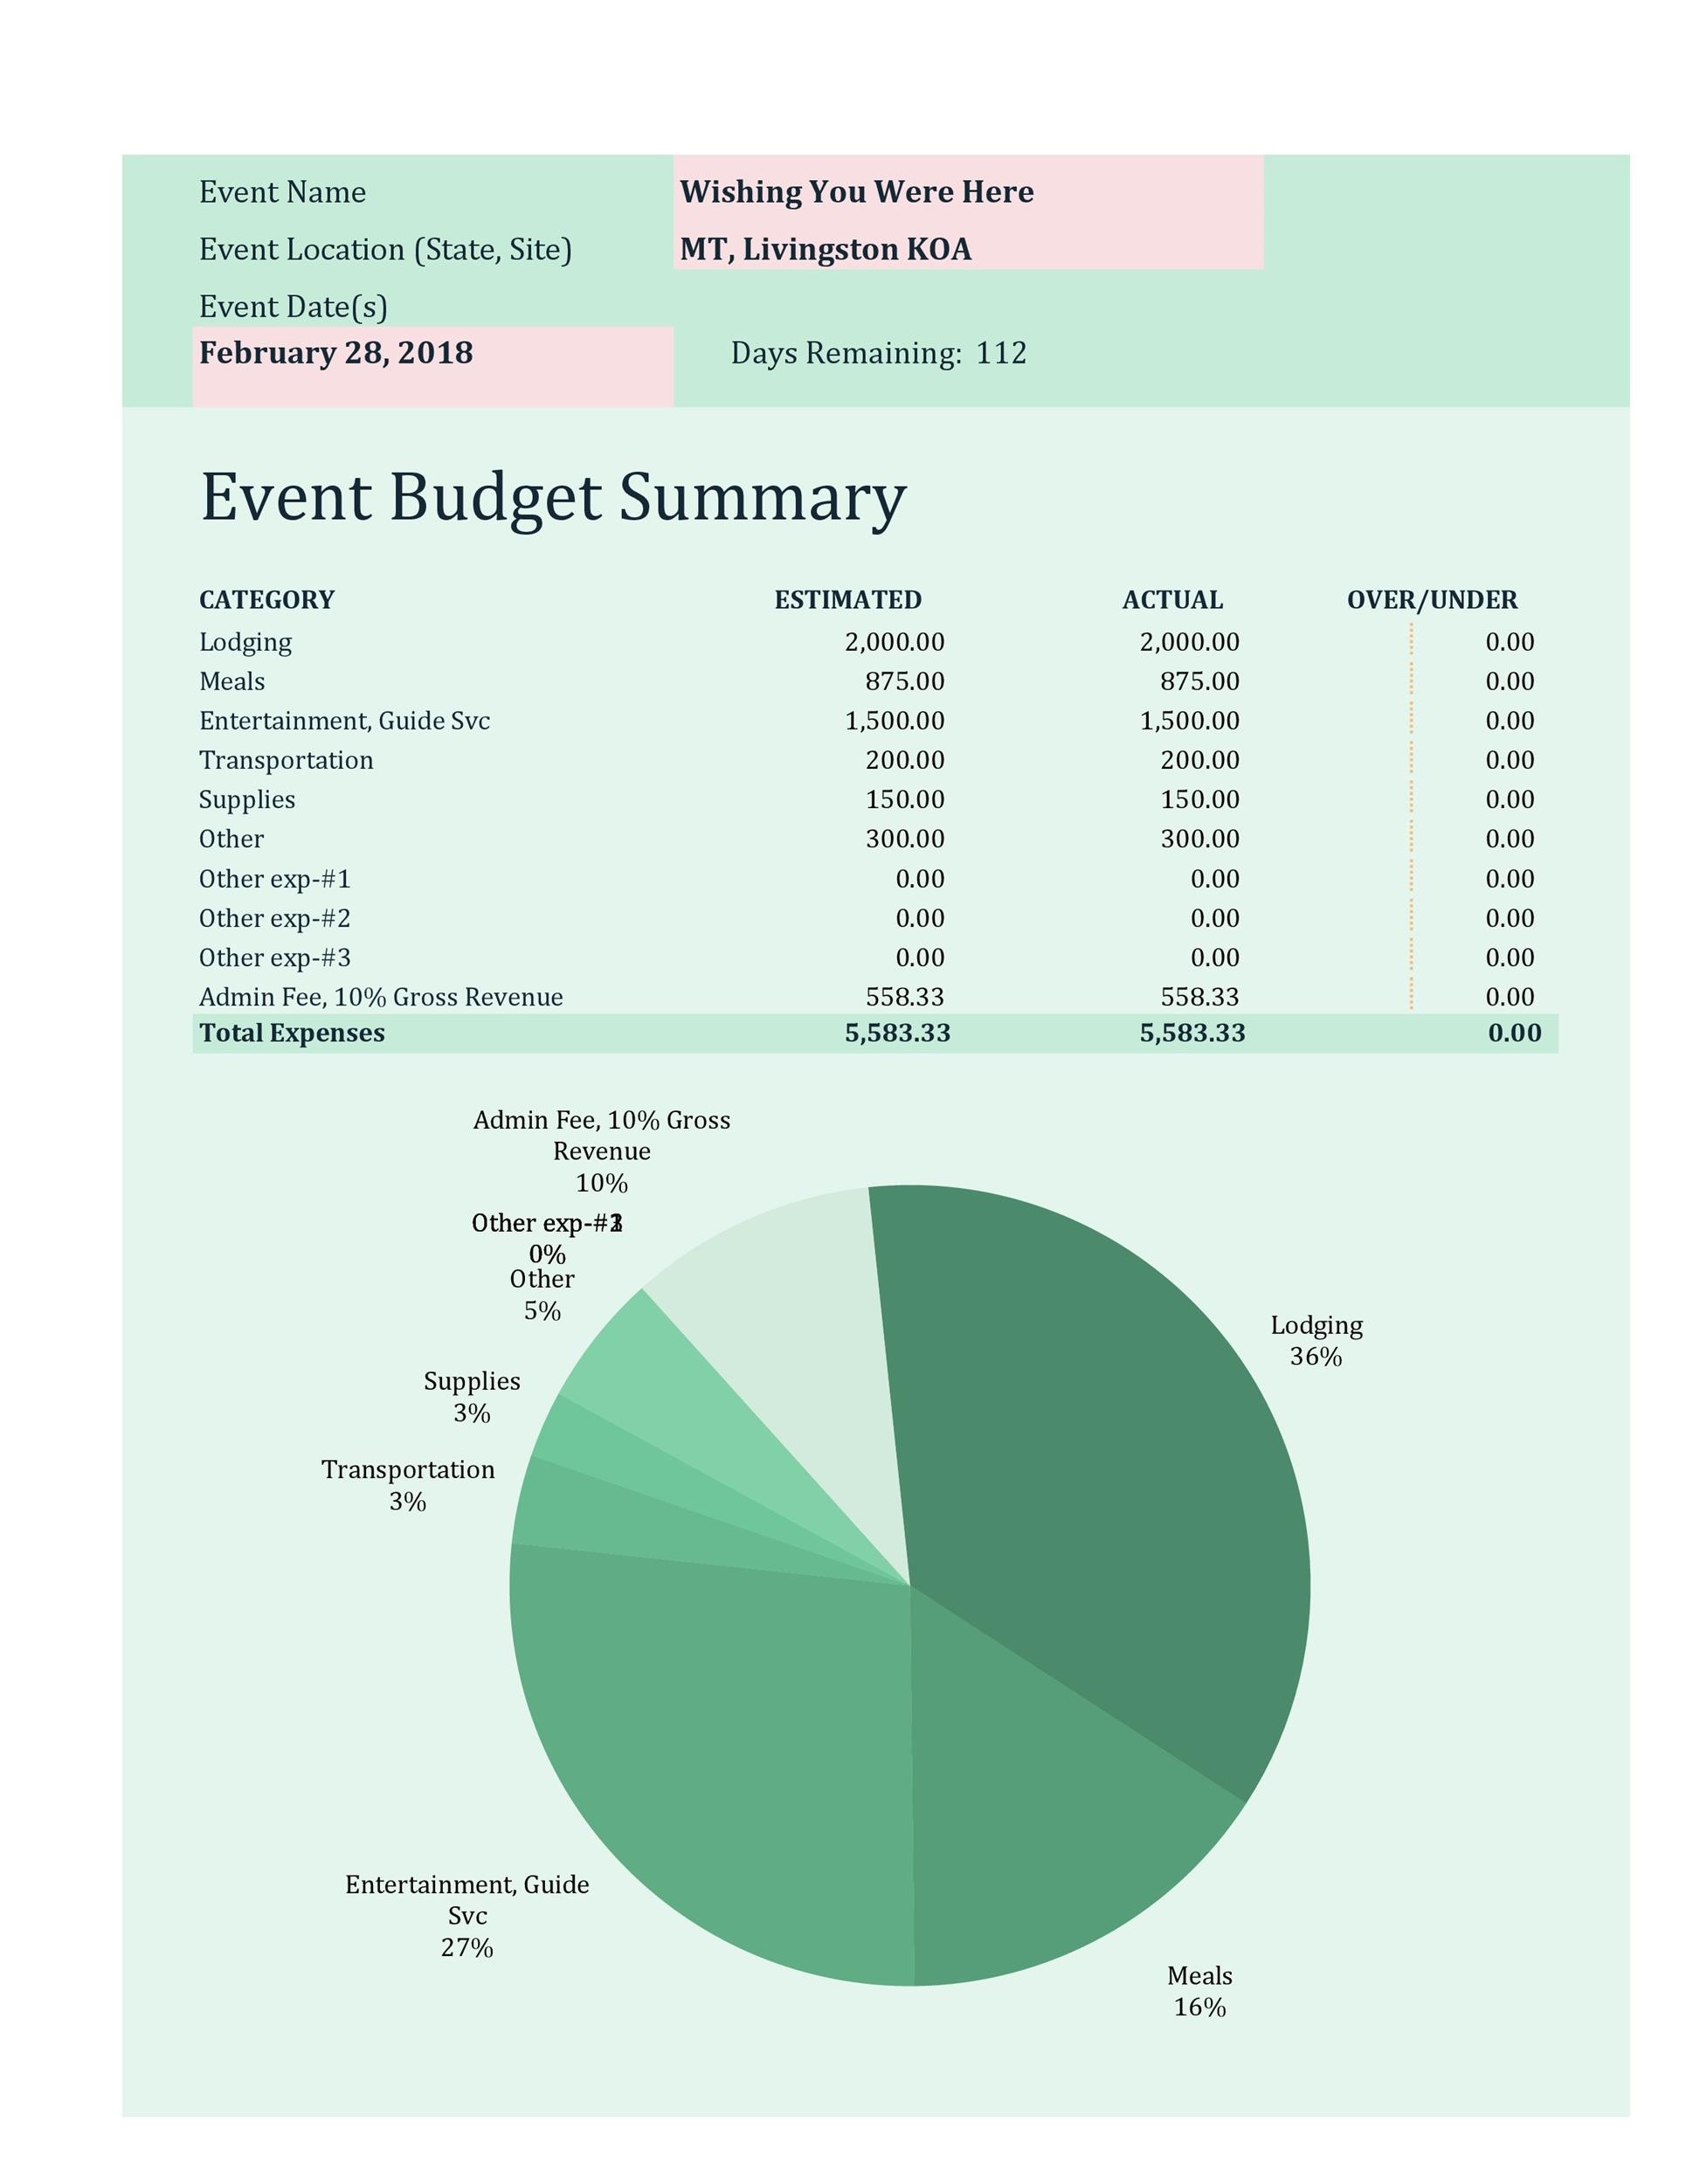 50 Useful Event Budget Templates ( Party Budget Planners) ᐅ